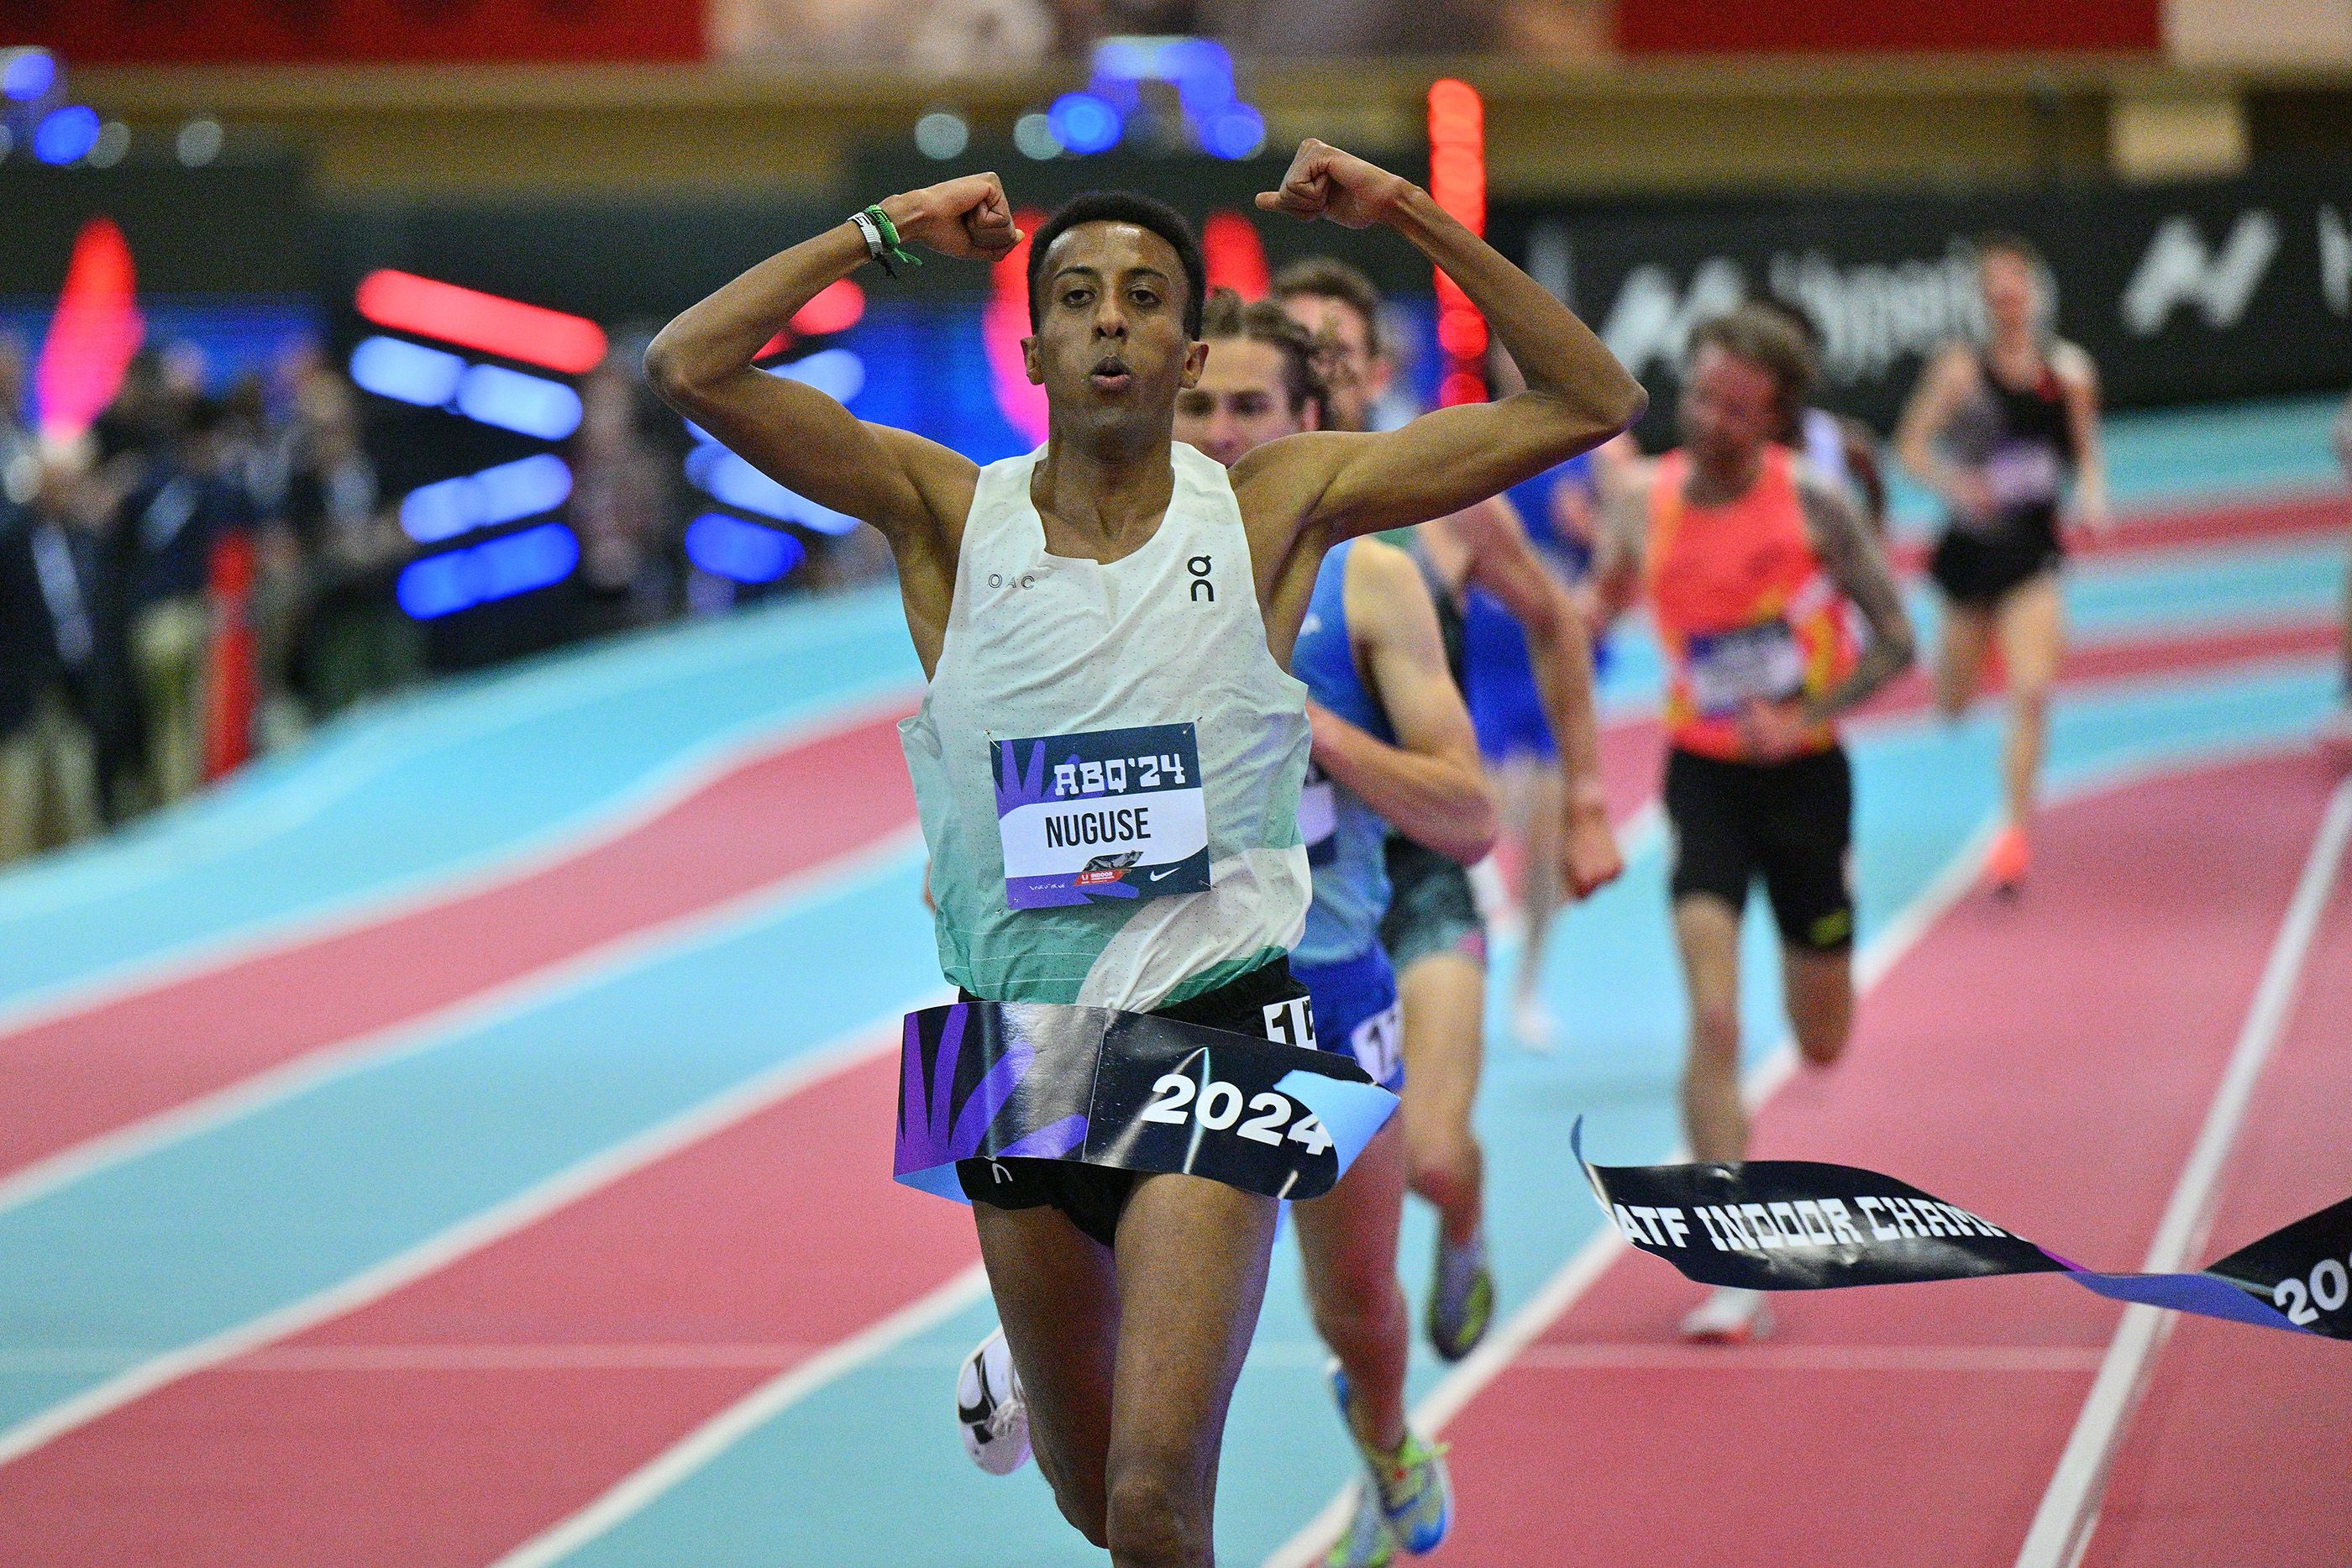 Yared Nuguse celebrates his win at the US Indoor Championships